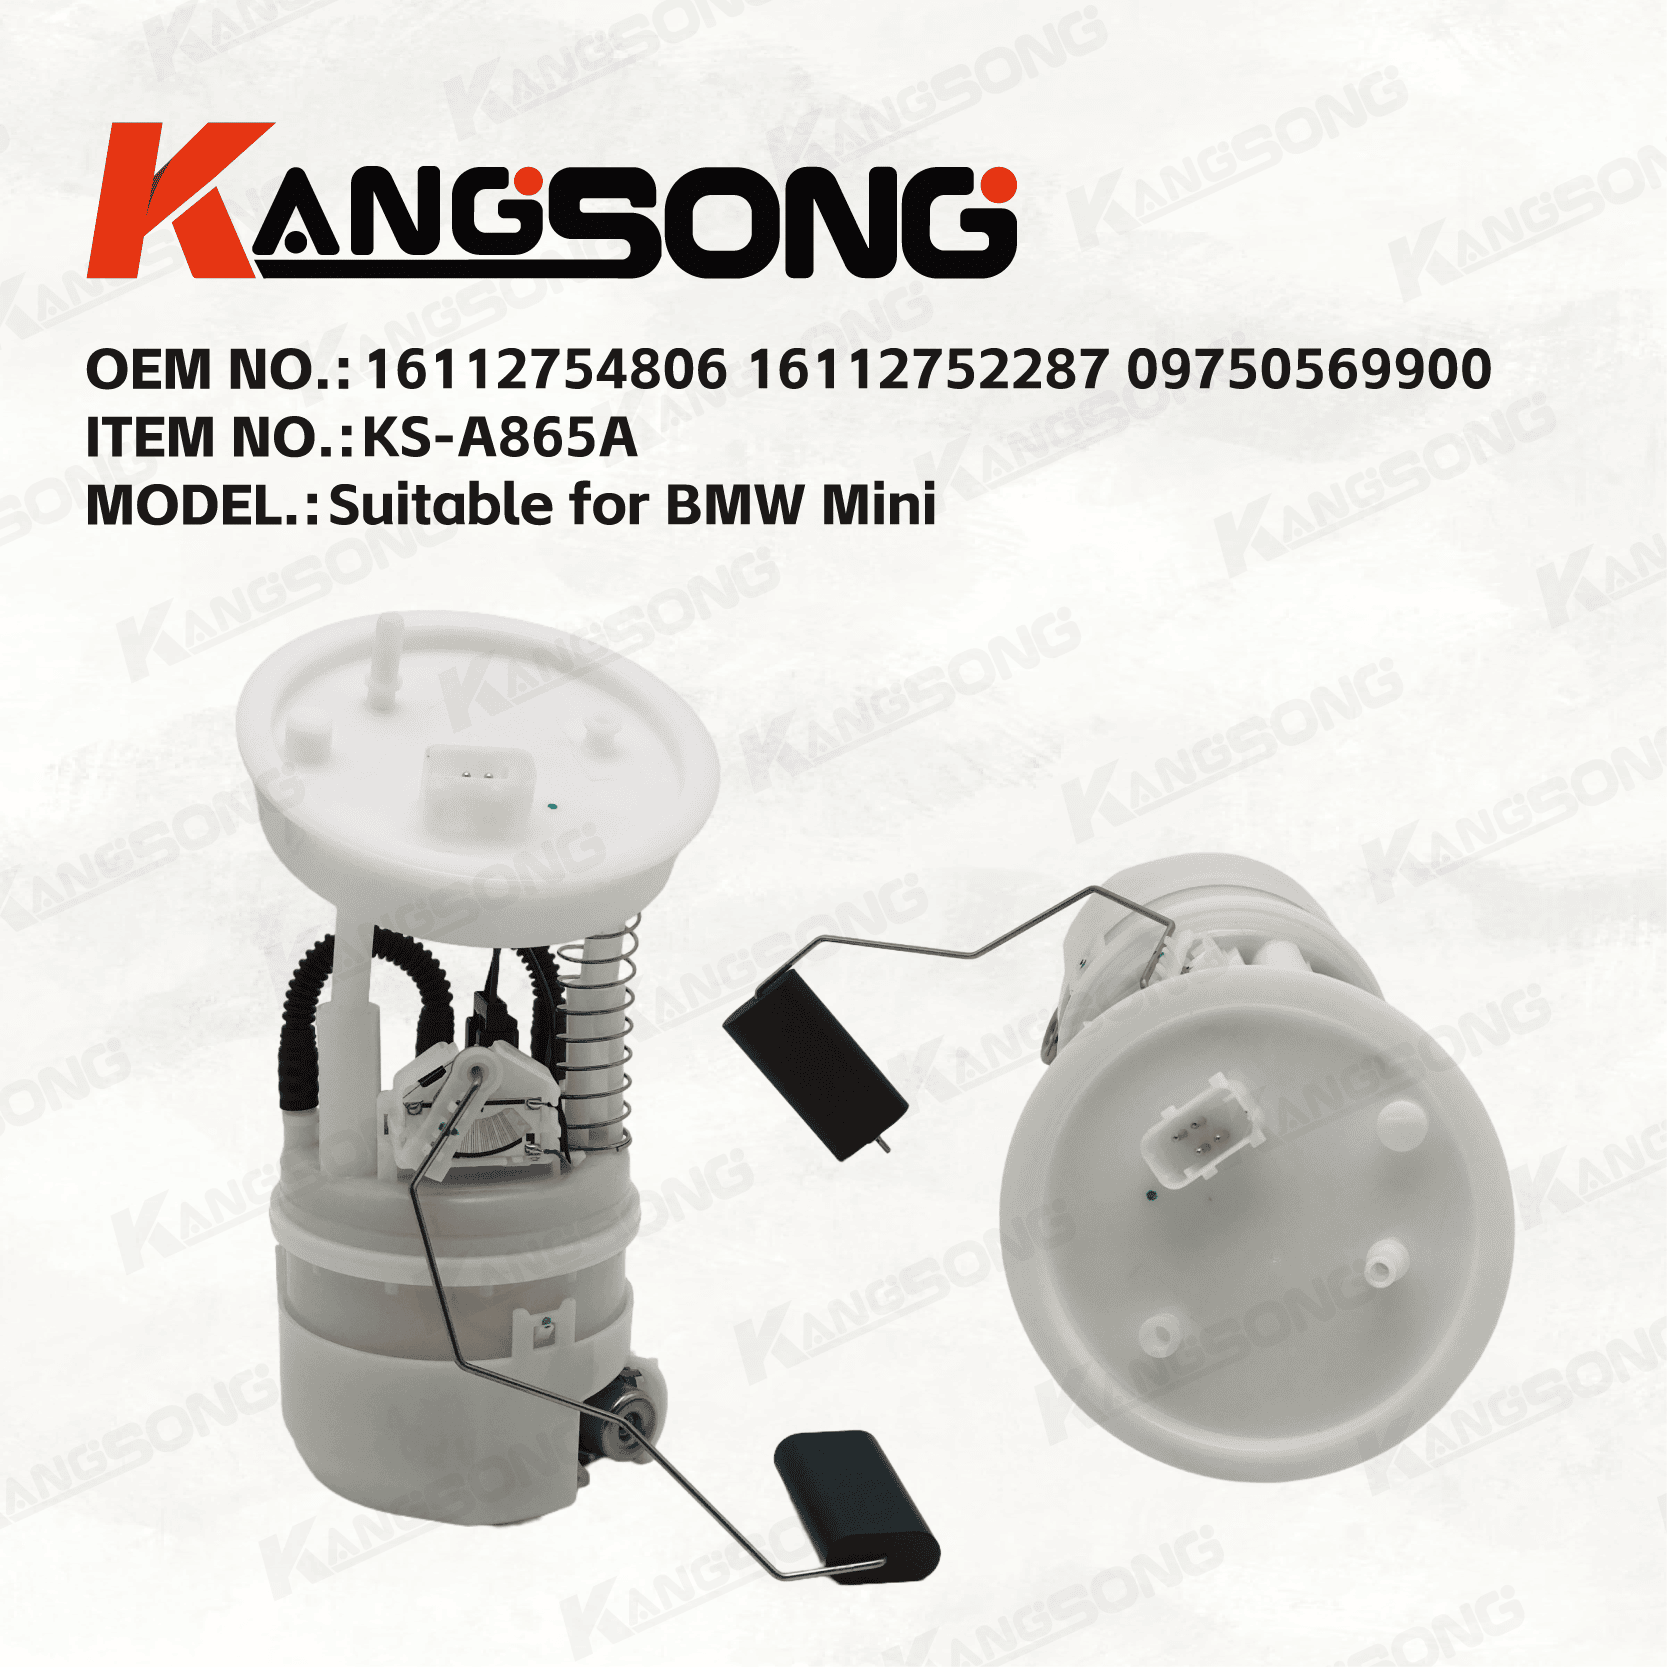 Applicable to BMW Mini/16112754806 16112752287 09750569900 16112765806/Fuel Pump Assembly/ KS-A865A